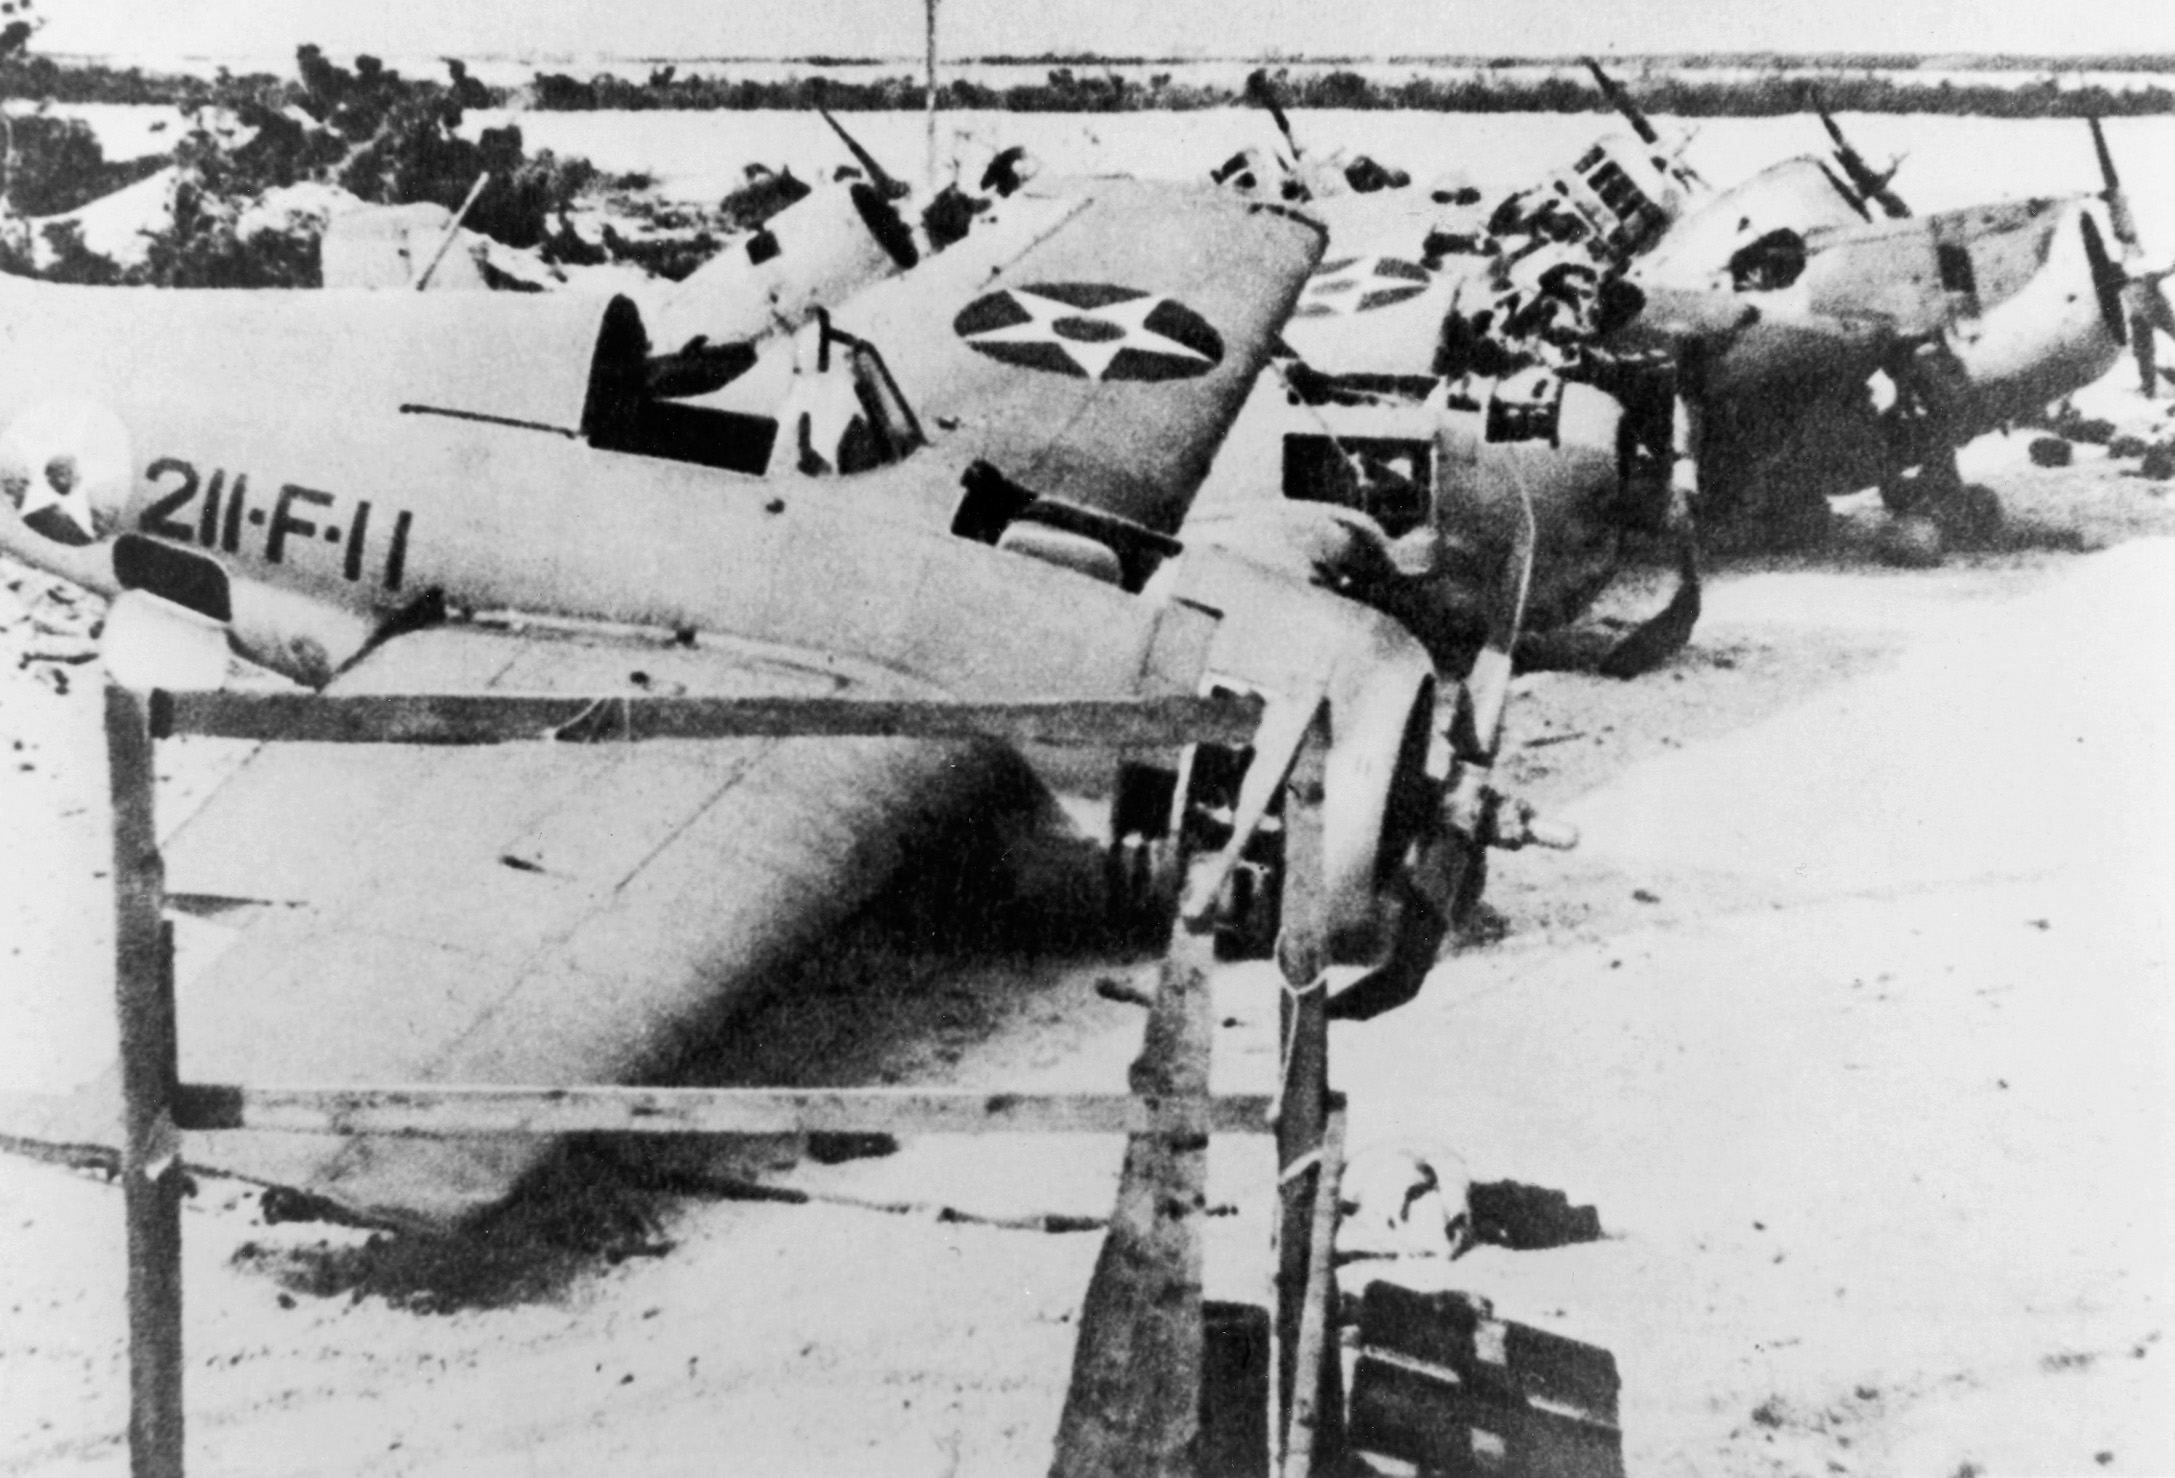 Disabled U.S.  Grumman F4F Wildcat fighter planes of Squadron VMF-211 sit idle on Wake Island shortly after its fall to the Japanese on December 23, 1941.